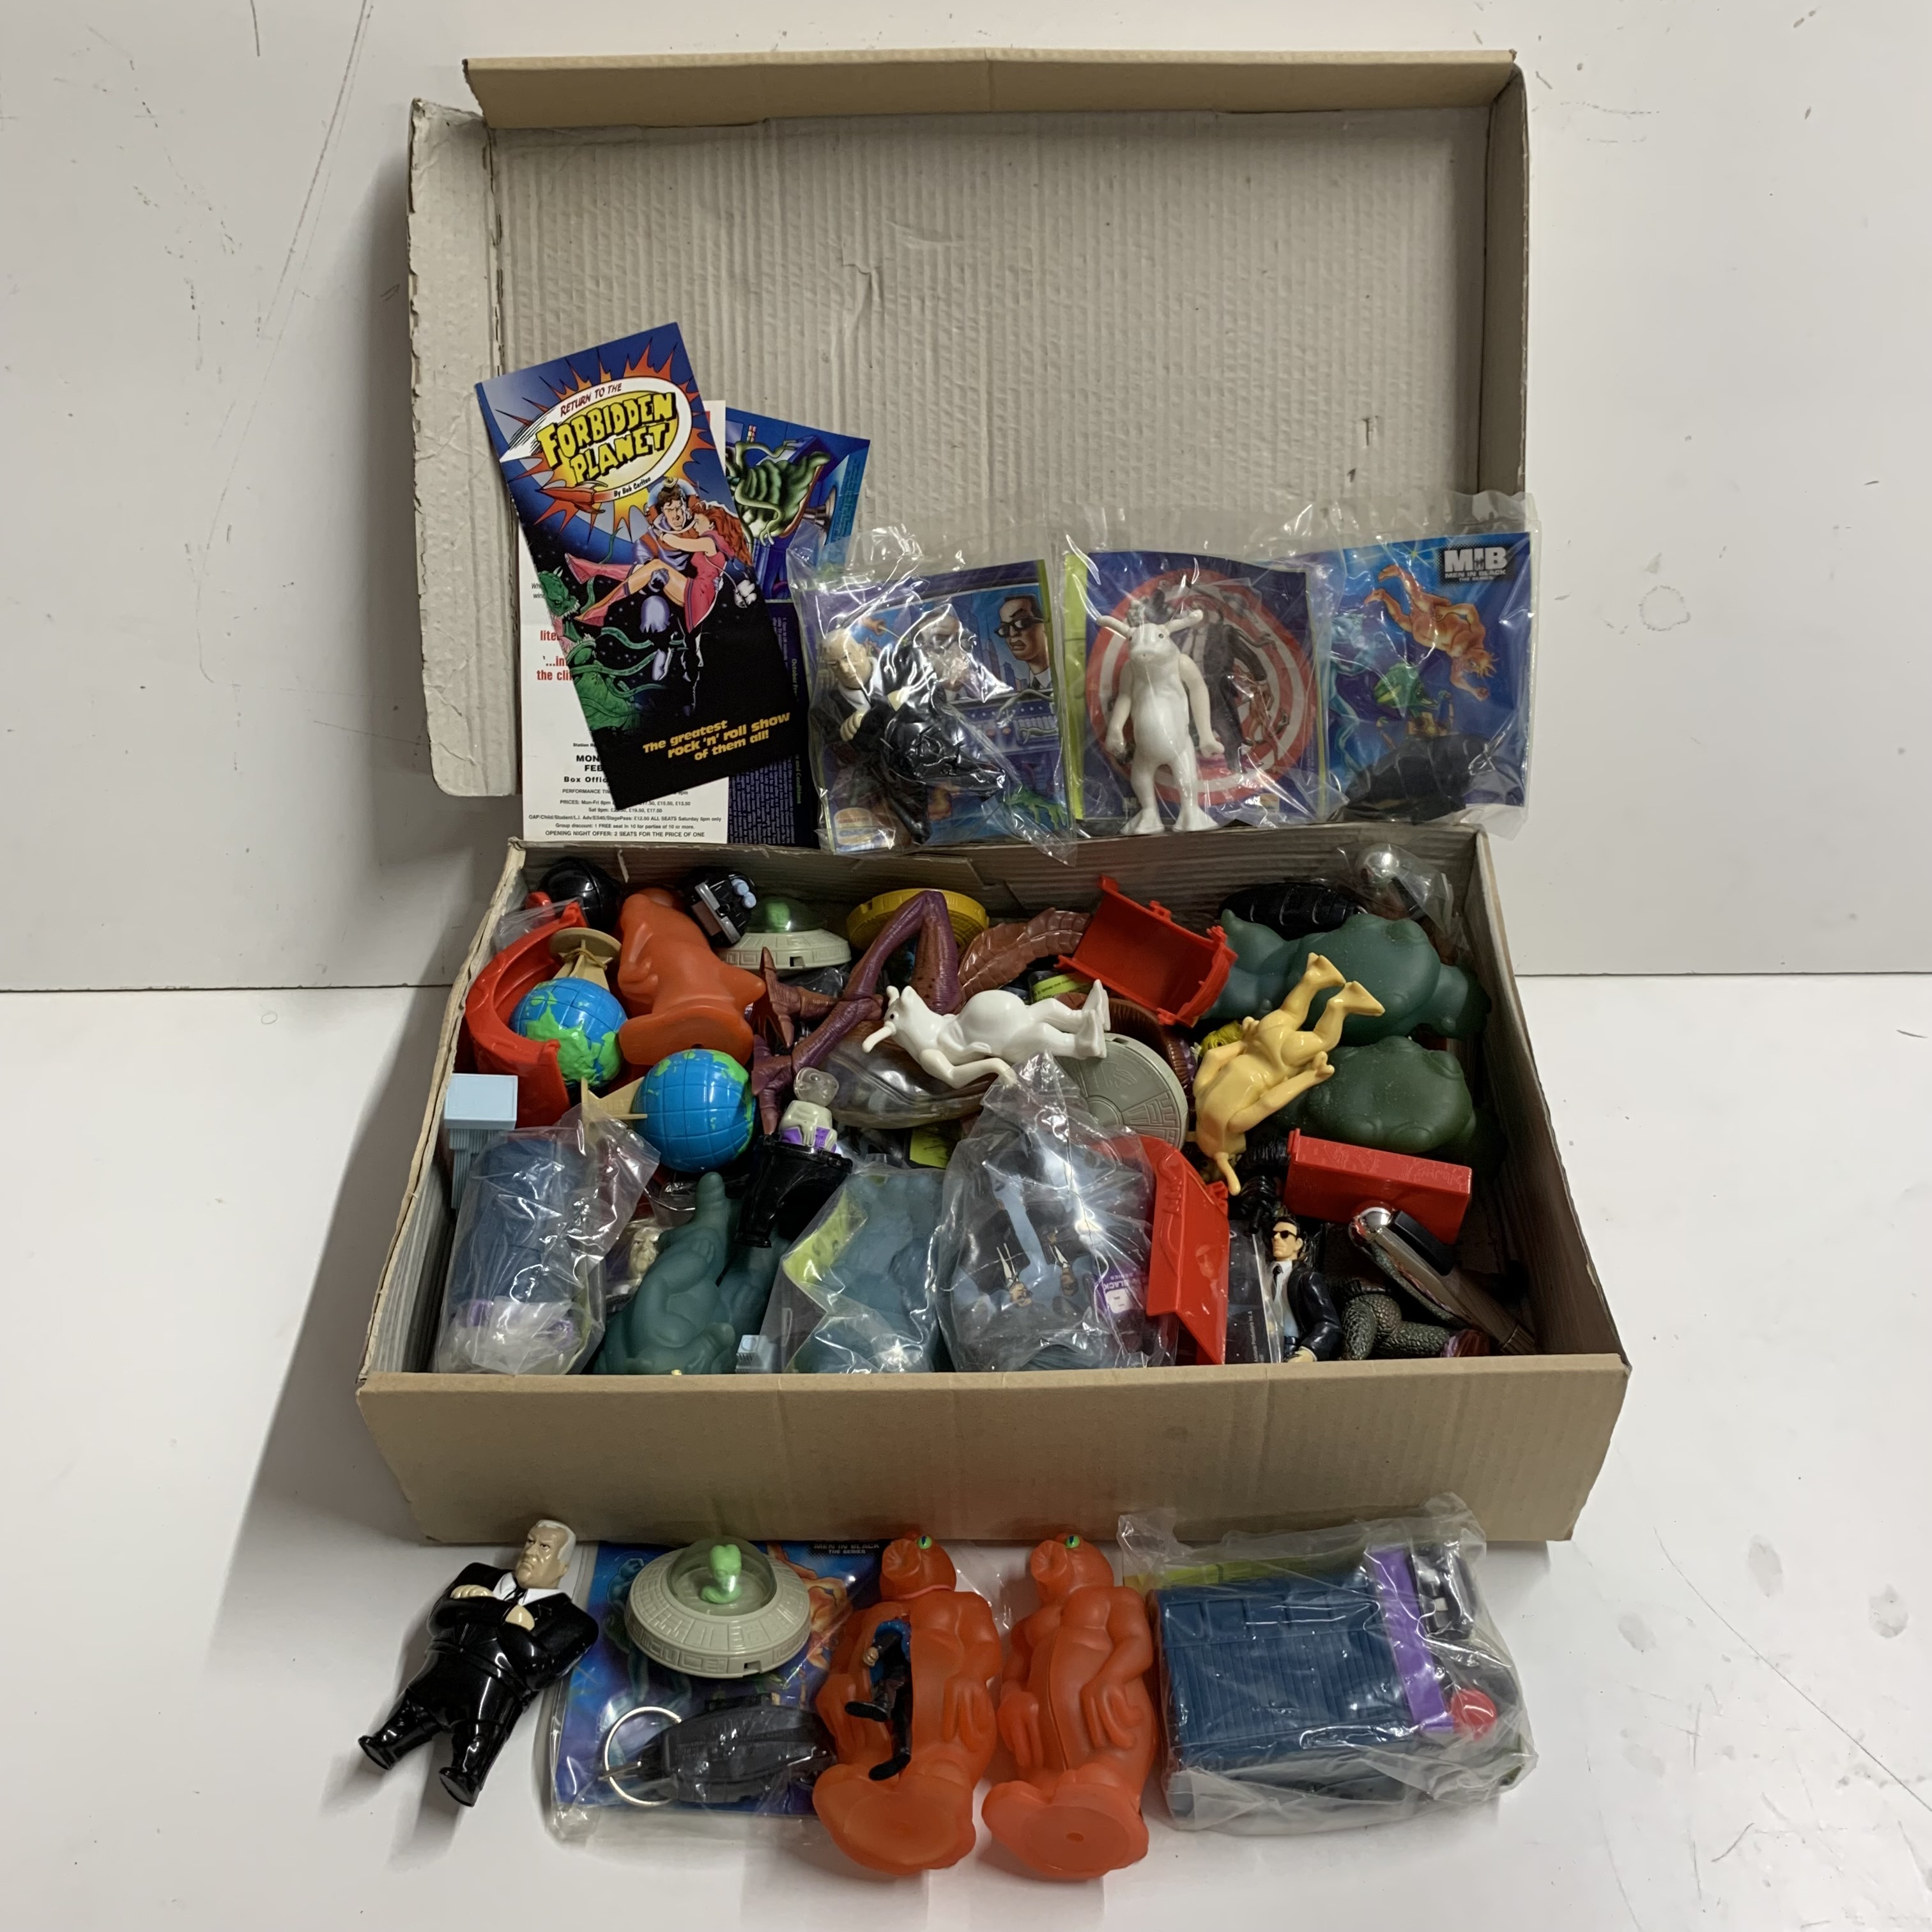 A quantity of Men in black Burger King toys and others.